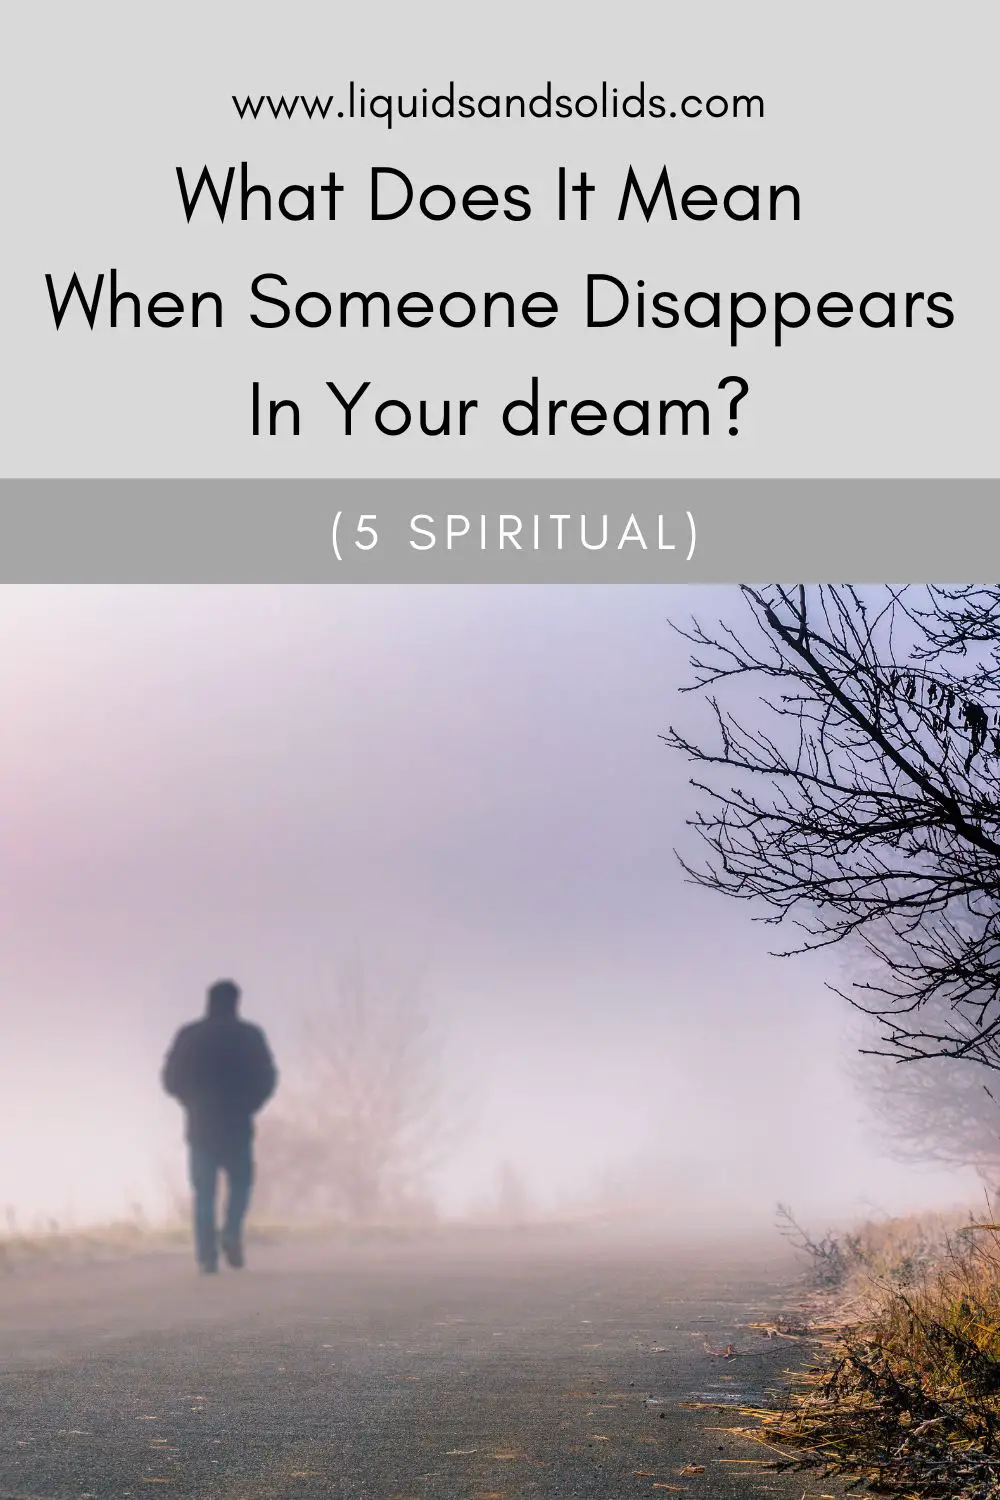 What Does It Mean When Someone Disappears In Your Dream?